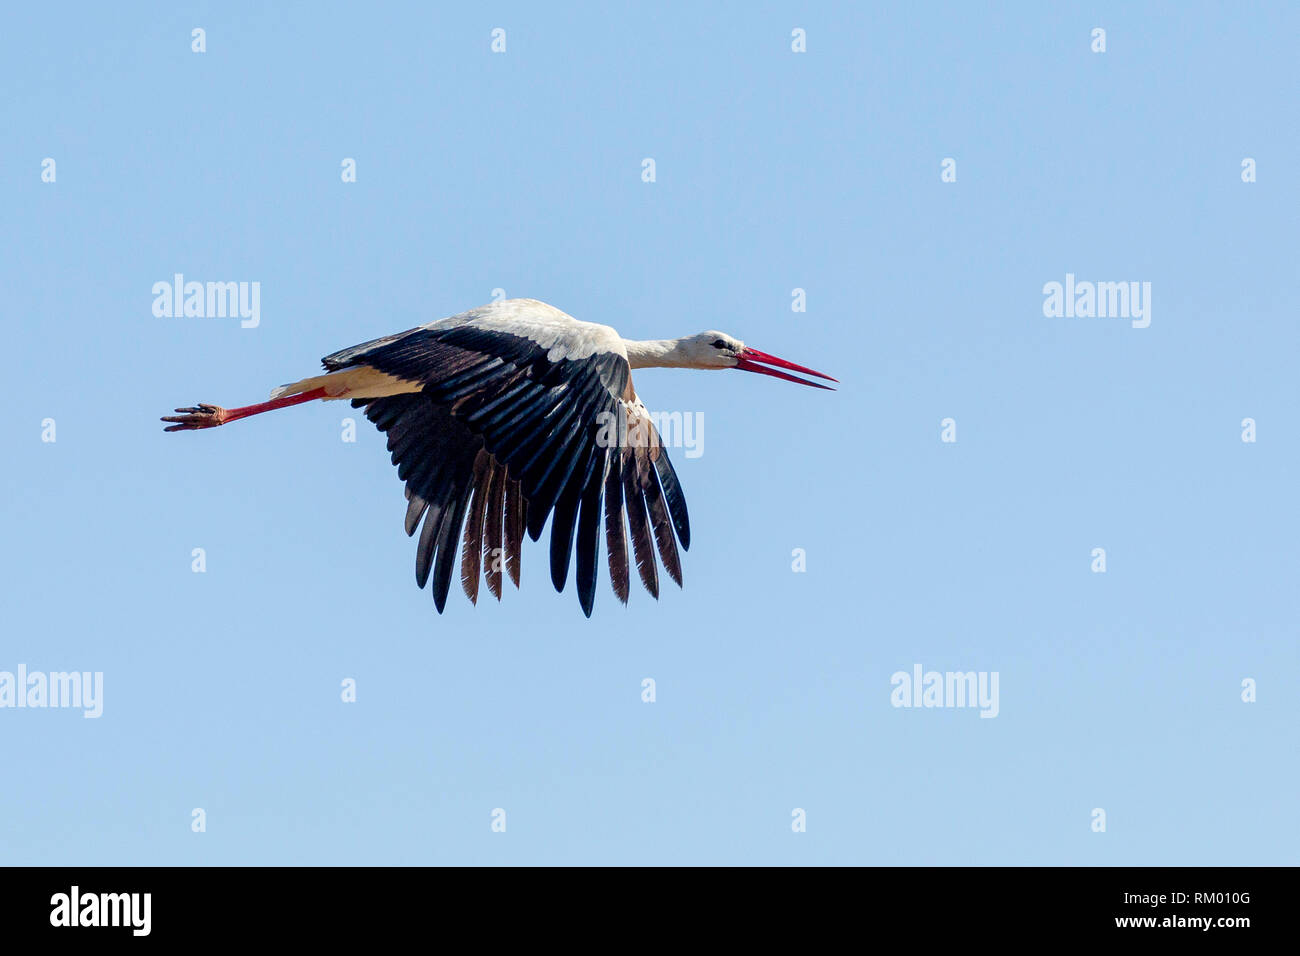 A single White Stork flying strongly, landscape format, Lewa Wilderness, Lewa Conservancy, Kenya, Africa Stock Photo